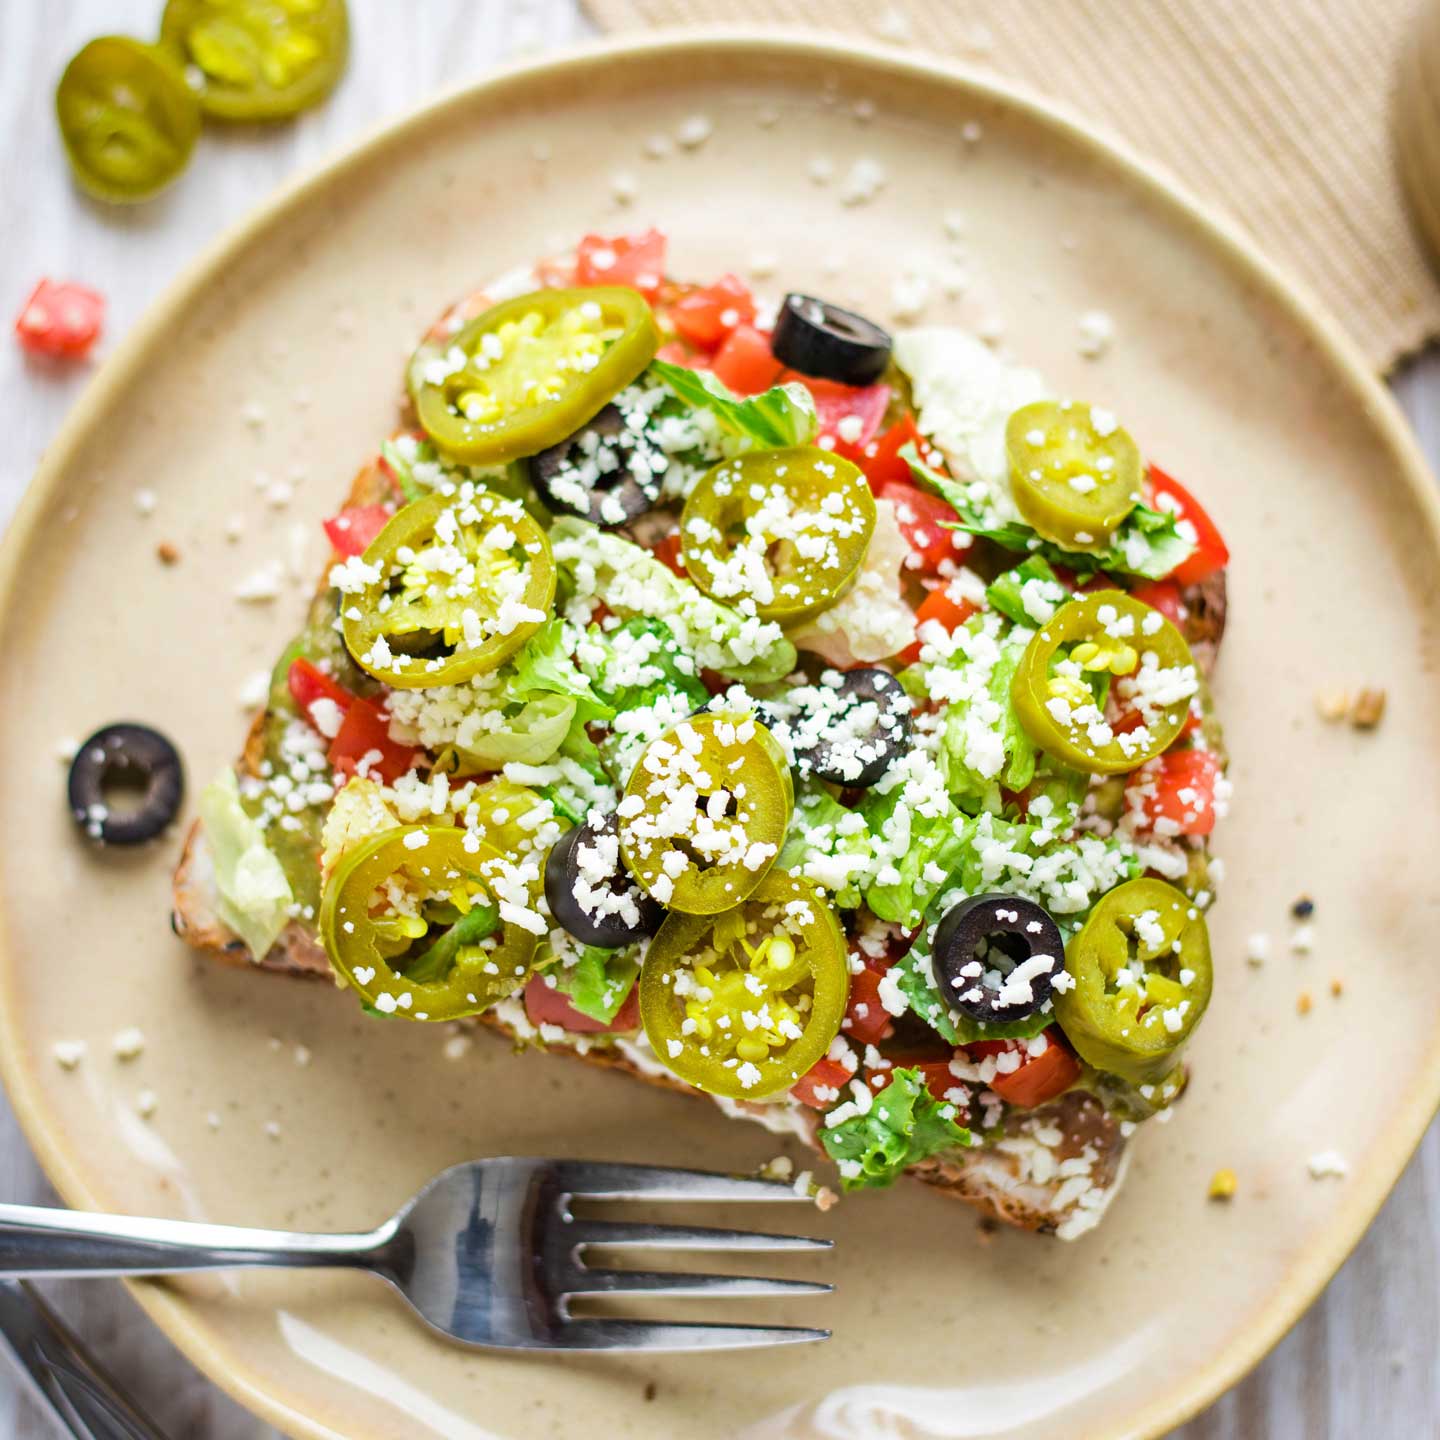 Avocado Toast on a plate with a fork, ready to dig in